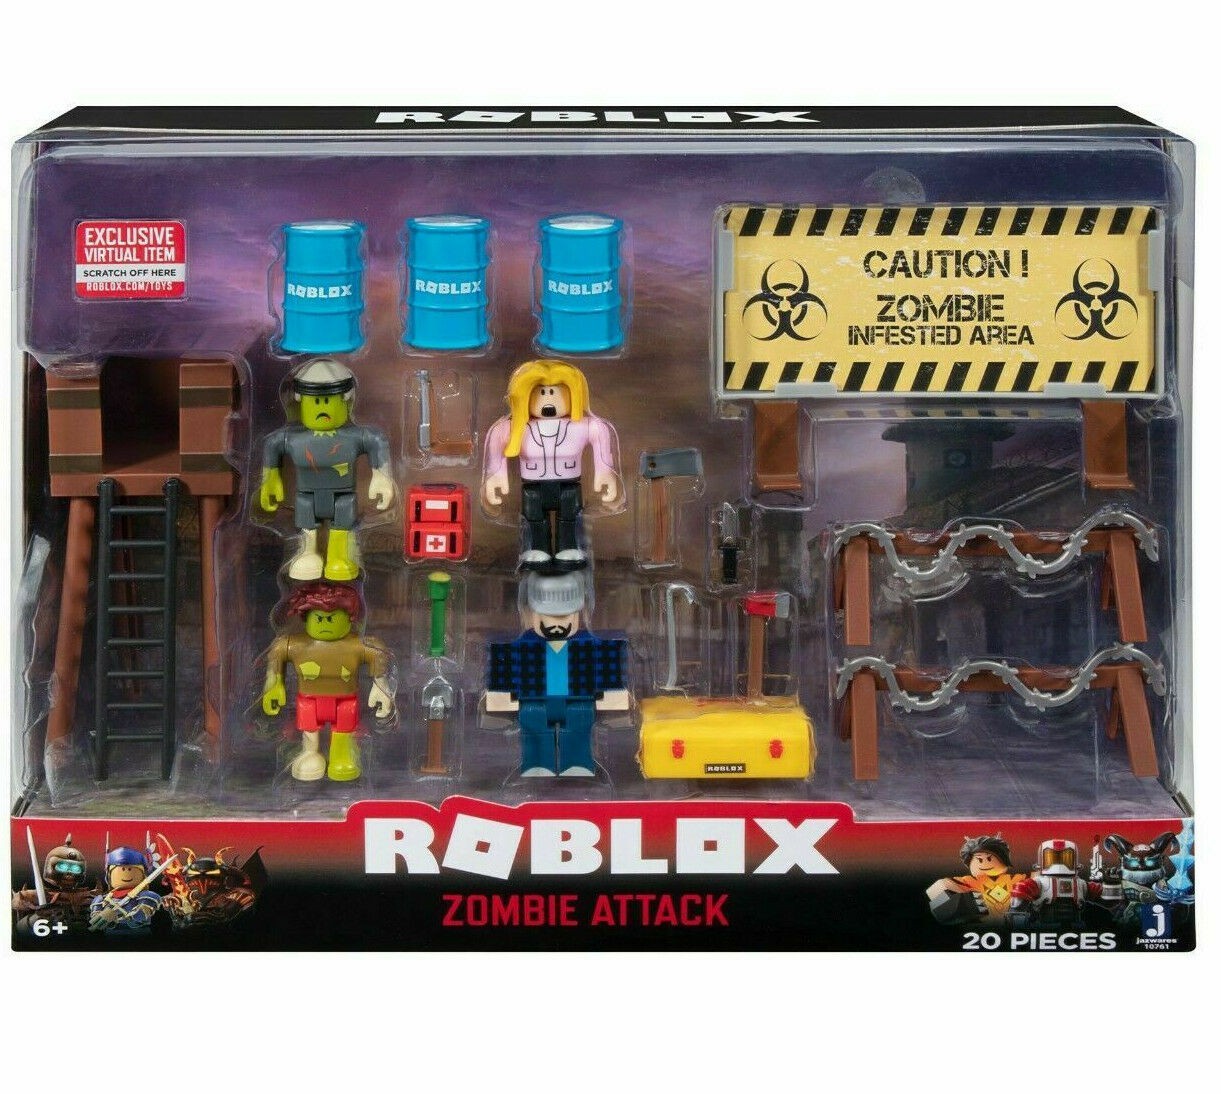 Roblox Zombie Attack Playset Ebay - the dope state of new york roblox